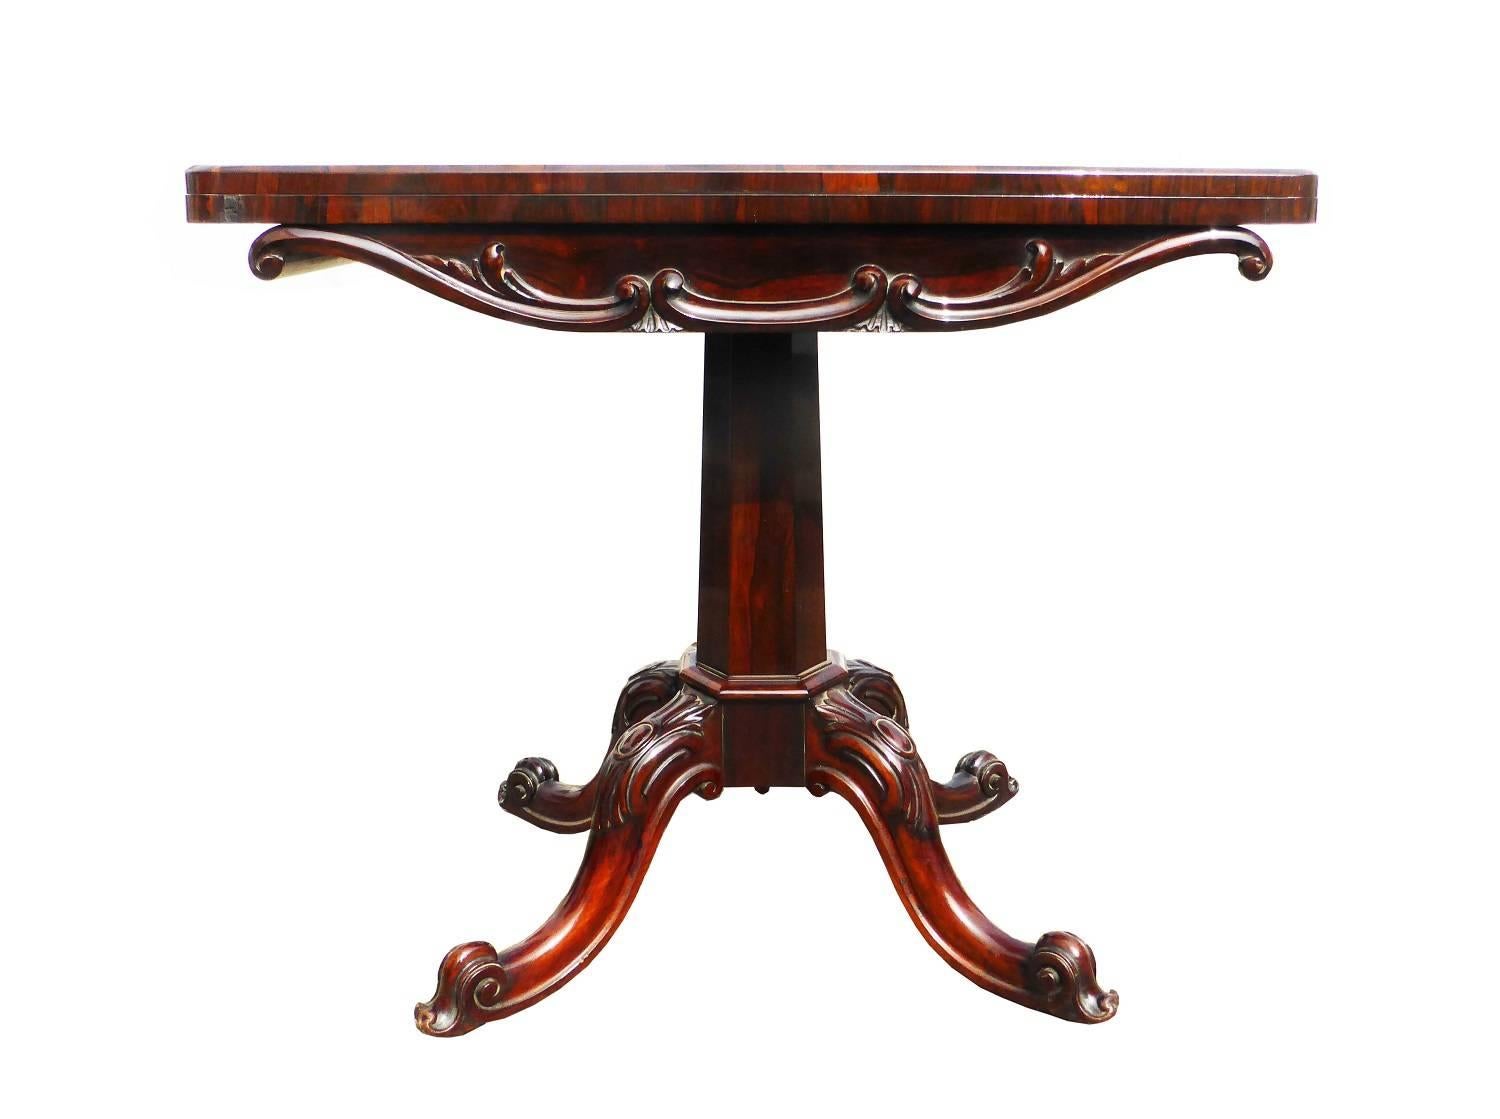 For sale is a Victorian rosewood card table. The top of the card table is decorated with floral carvings to the front. The top swivels and folds over to reveal a green baise, which is in excellent condition. The base of the table has four